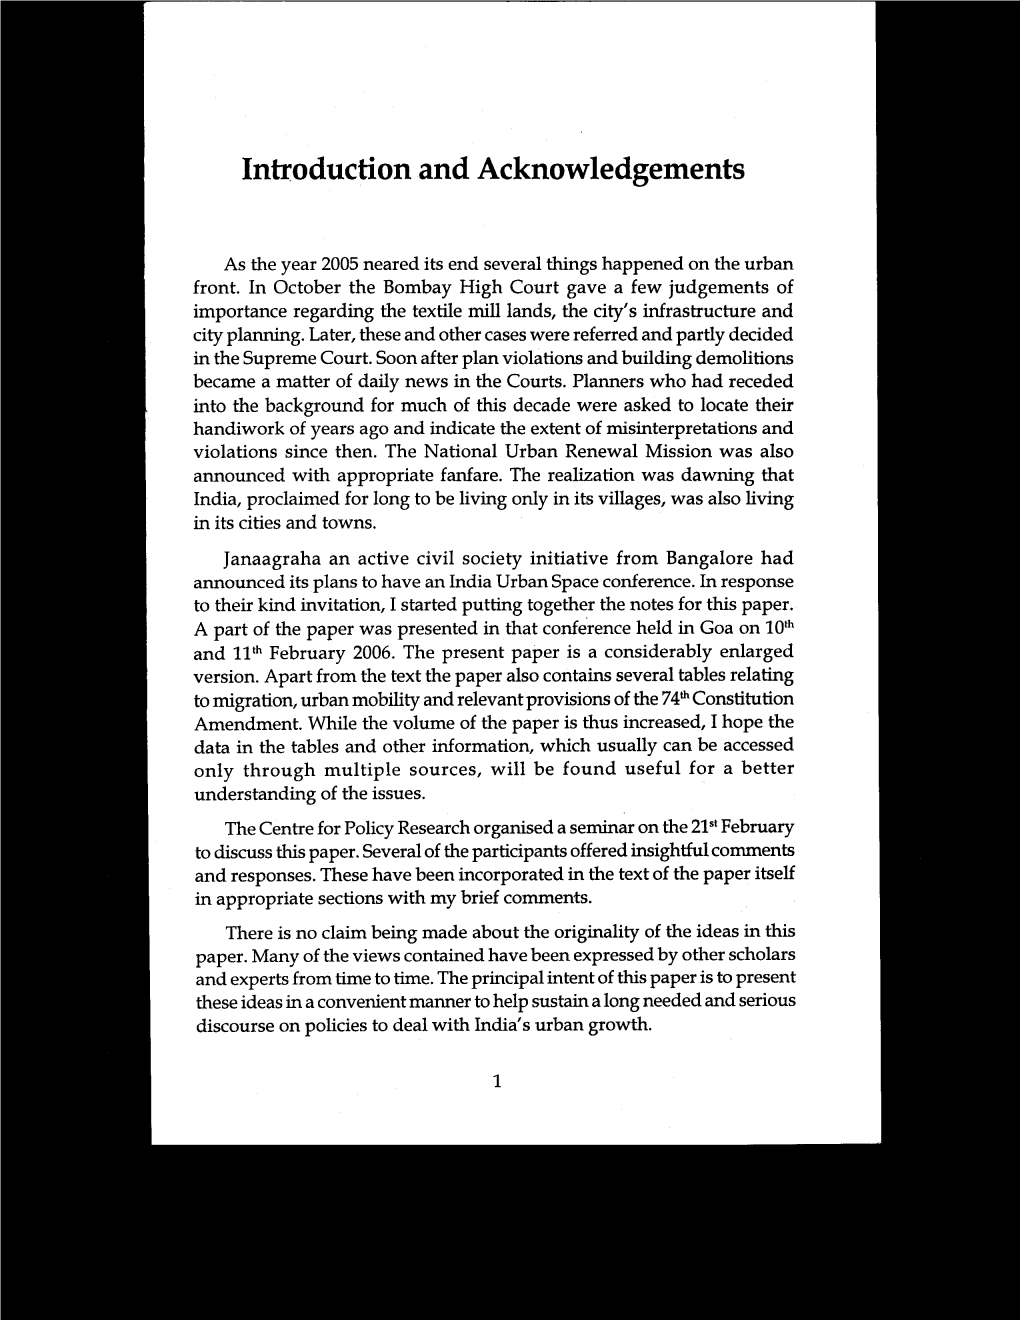 Introduction and Acknowledgements